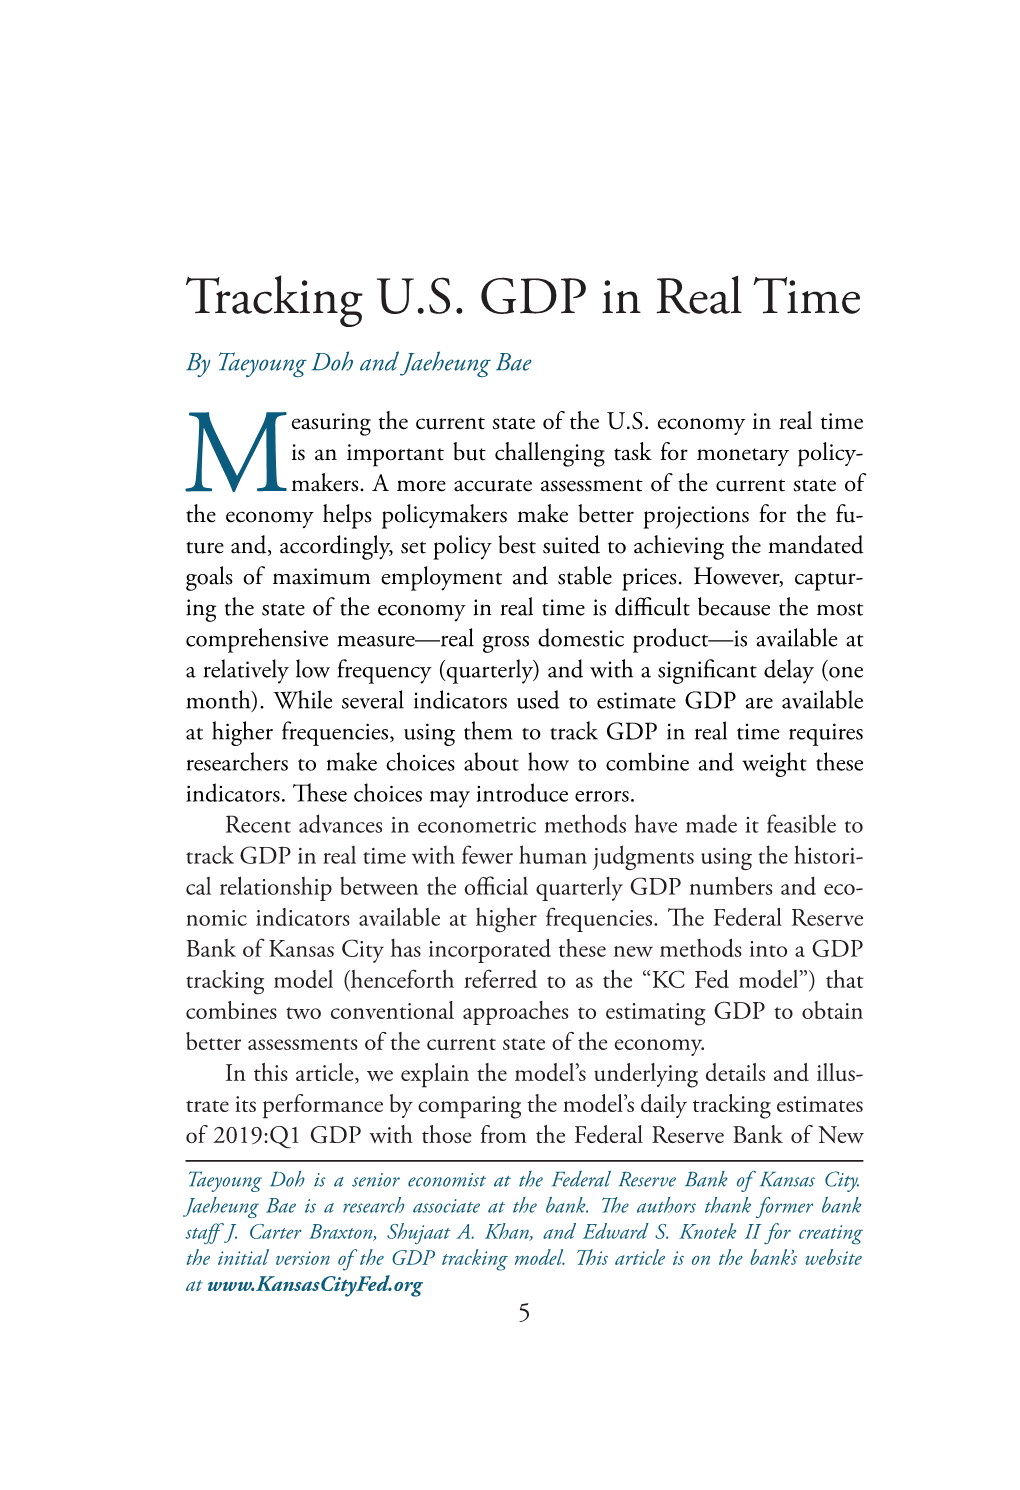 Tracking U.S. GDP in Real Time by Taeyoung Doh and Jaeheung Bae